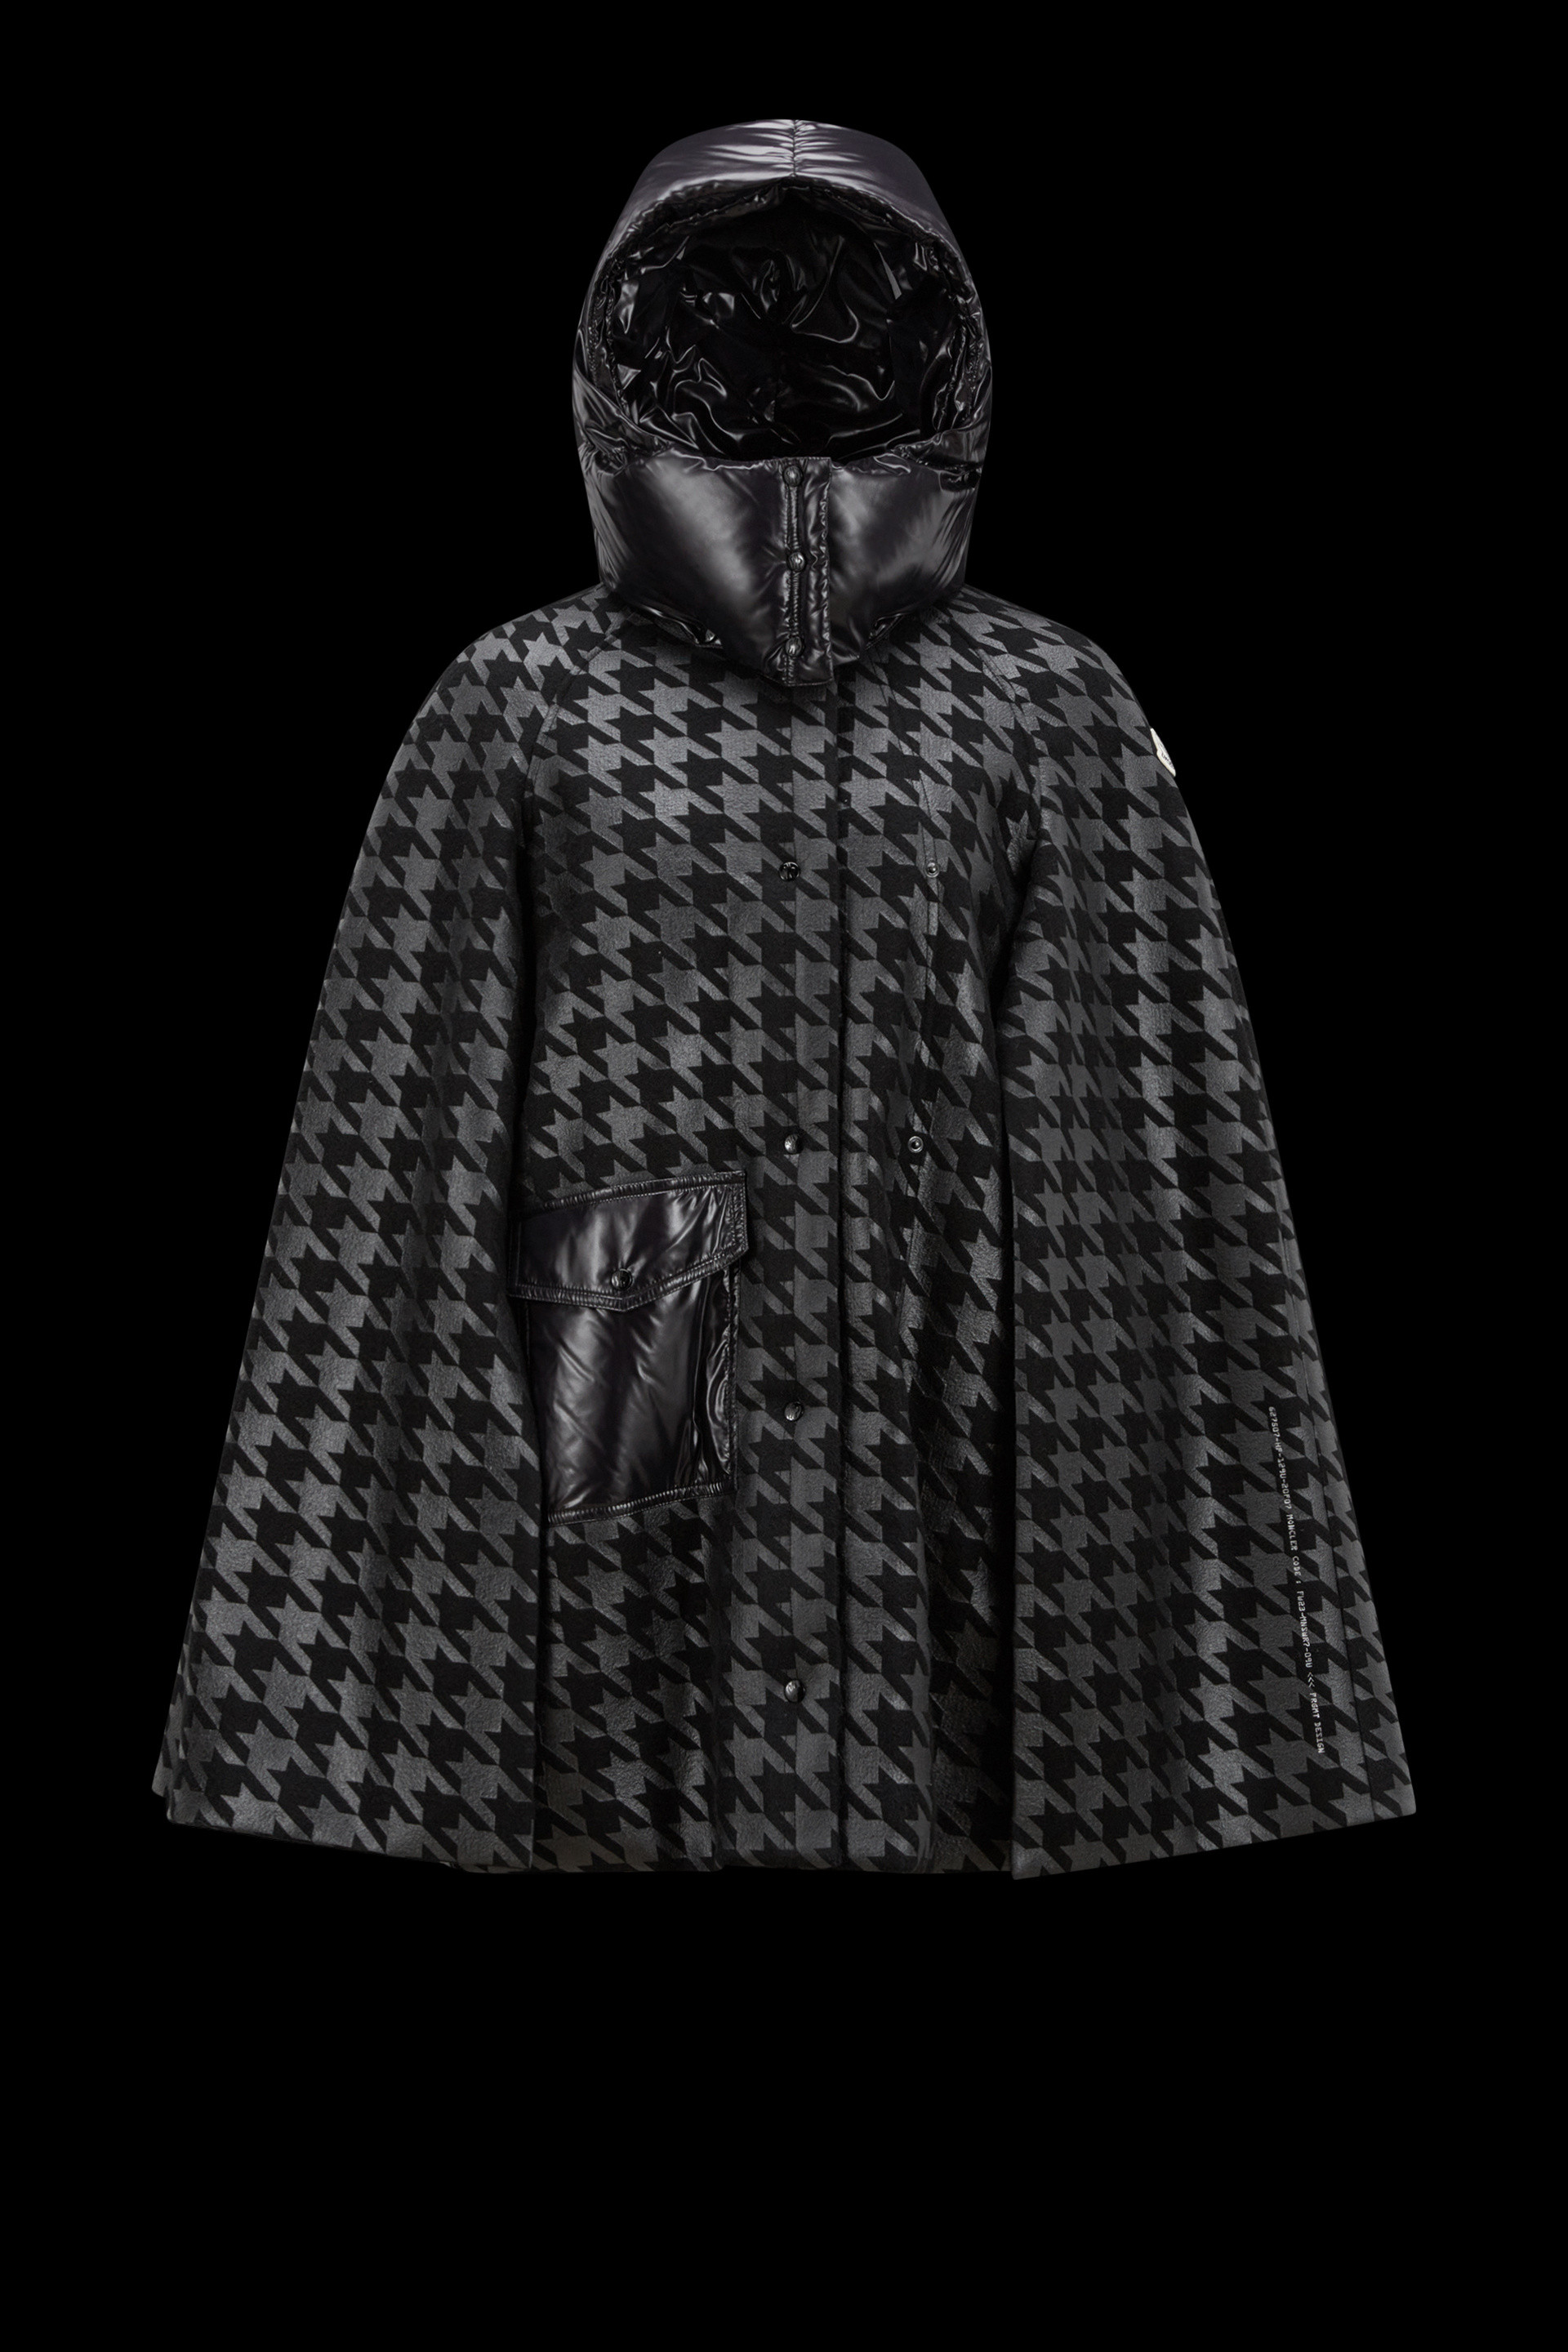 97%OFF!】 MONCLER CLOAK Poncho Coat Ladys Outer 2020AW モンクレール クローク マント ポンチョ  コート レディース アウター 2020-2021年秋冬